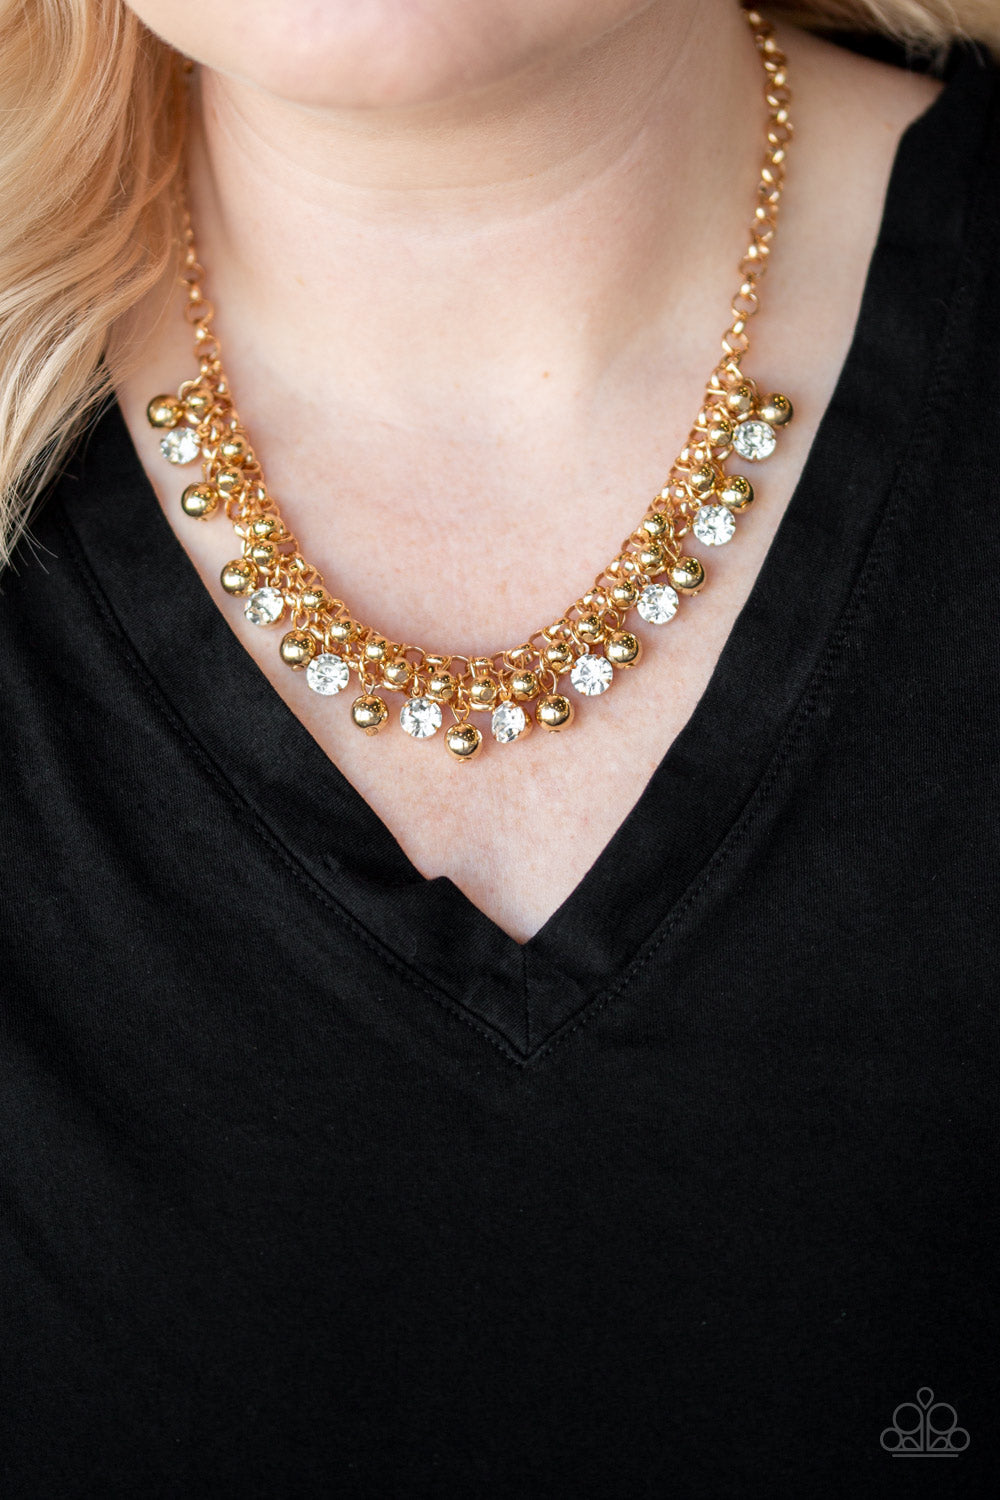 Paparazzi Accessories - Wall Street Winner - Gold Necklace